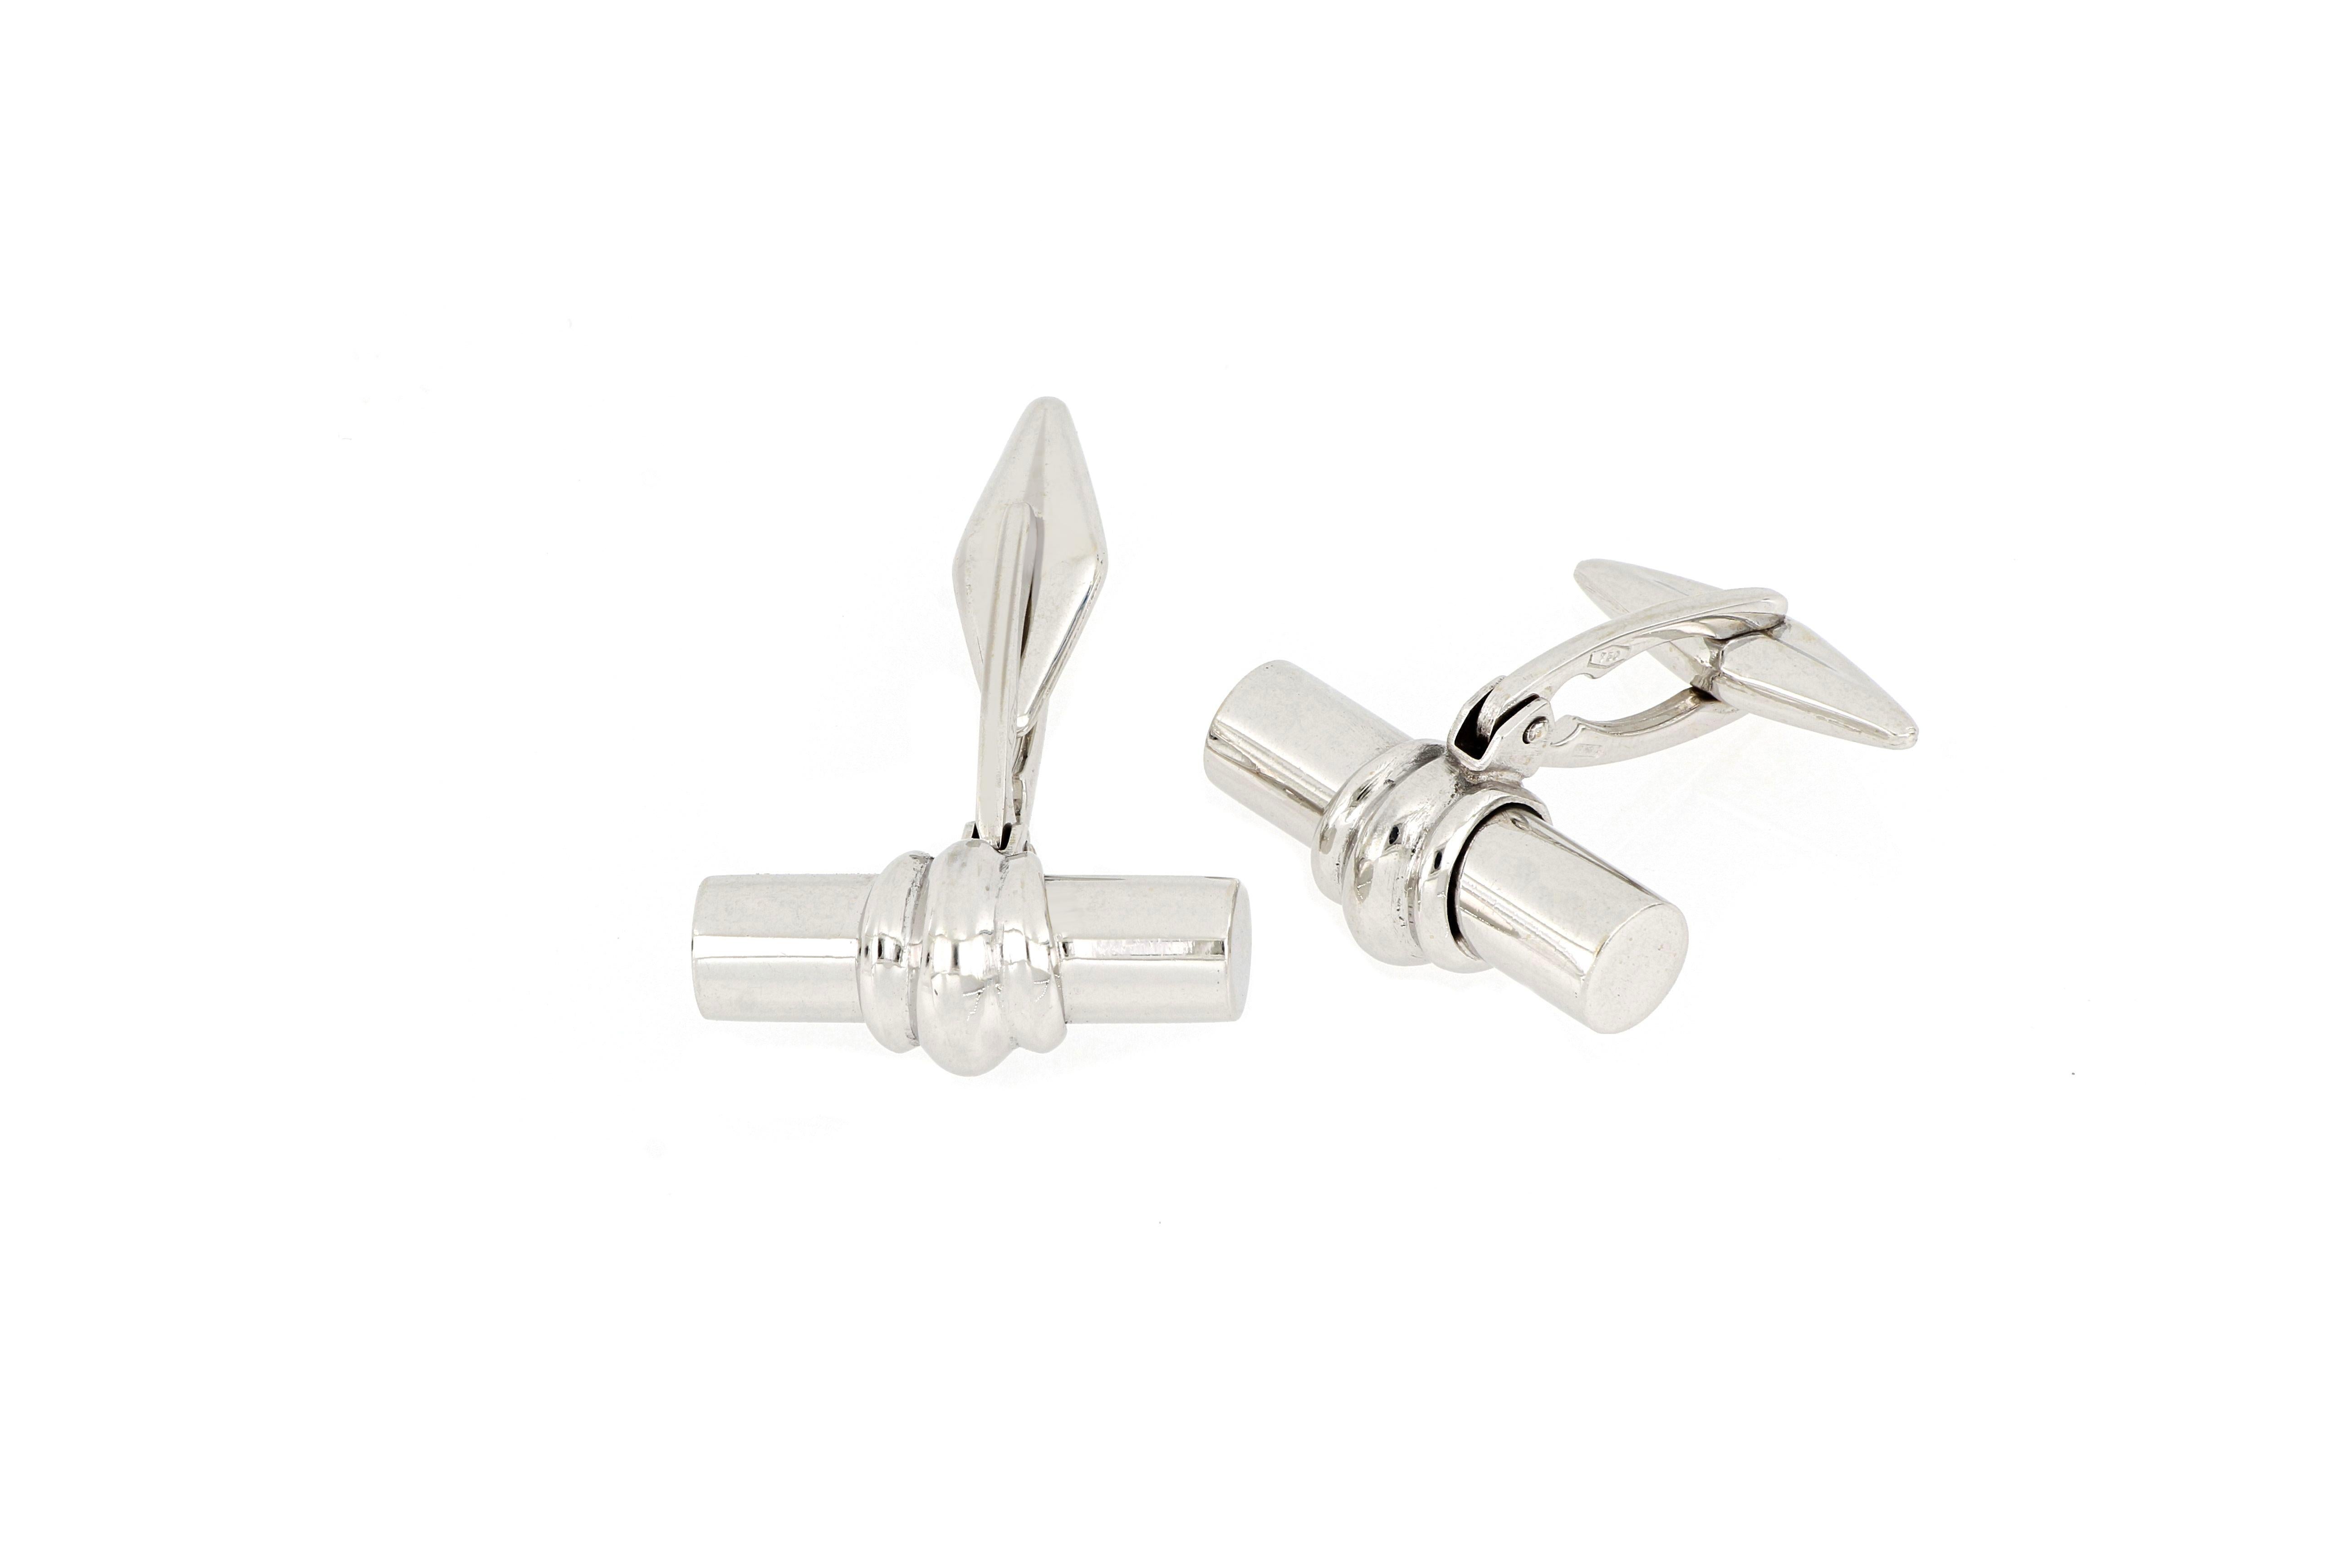  This pair of simple and classic cufflinks is made of 18 karat solid white gold, with smooth polished surface. A very nice and elegant piece of Italian jewellery for men.
O’Che 1867 was founded one and a half centuries ago in Macau. The brand is